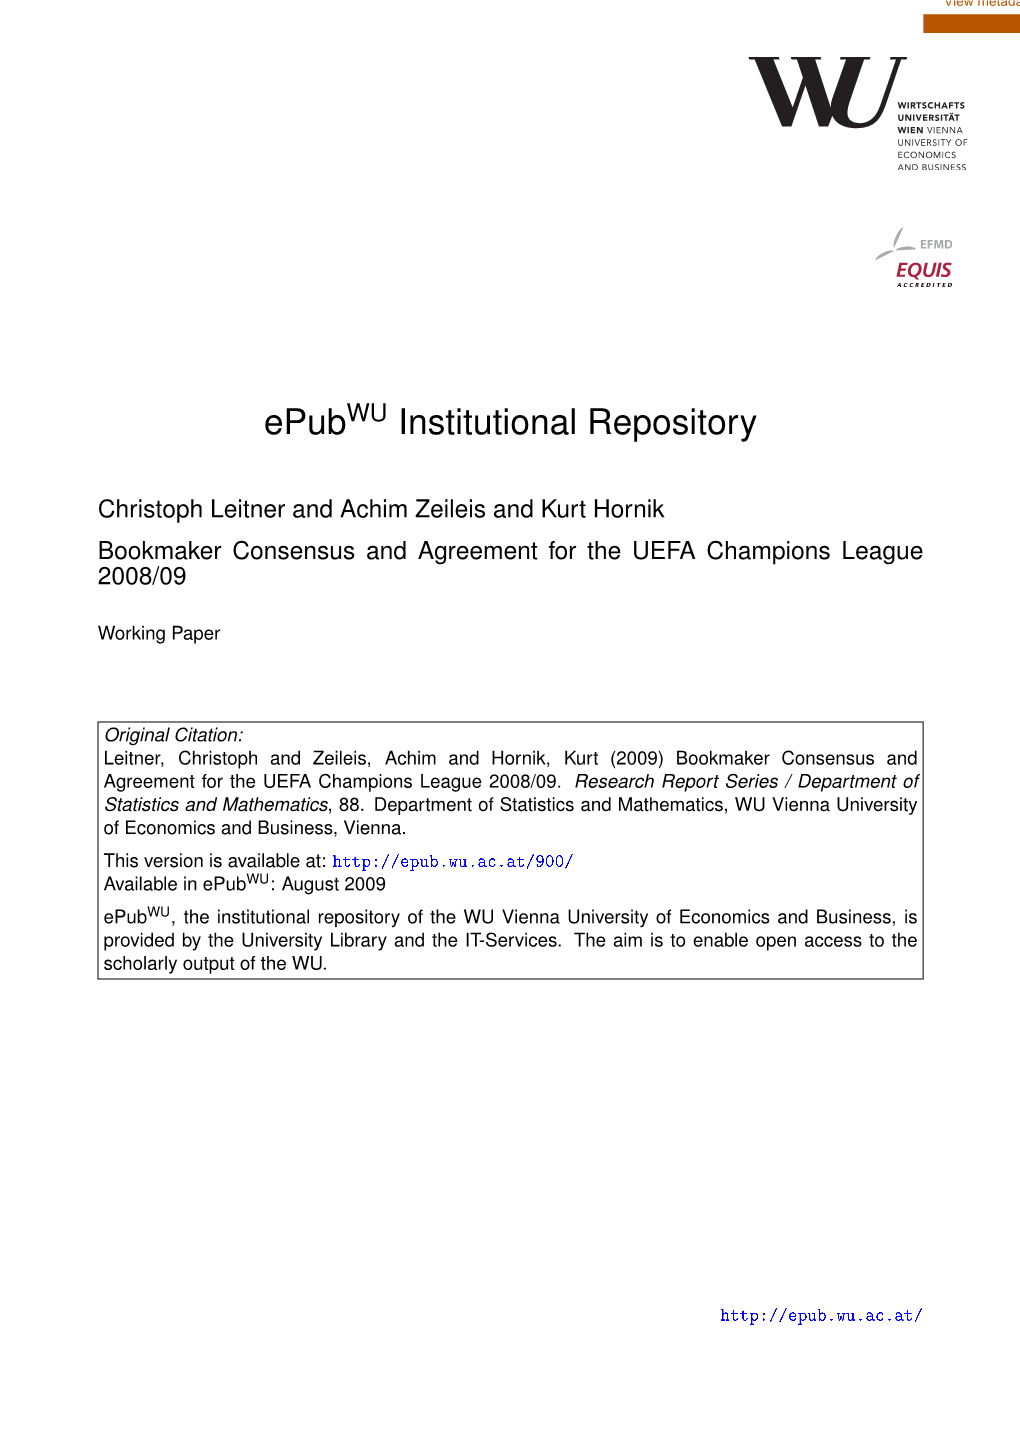 Bookmaker Consensus and Agreement for the UEFA Champions League 2008/09